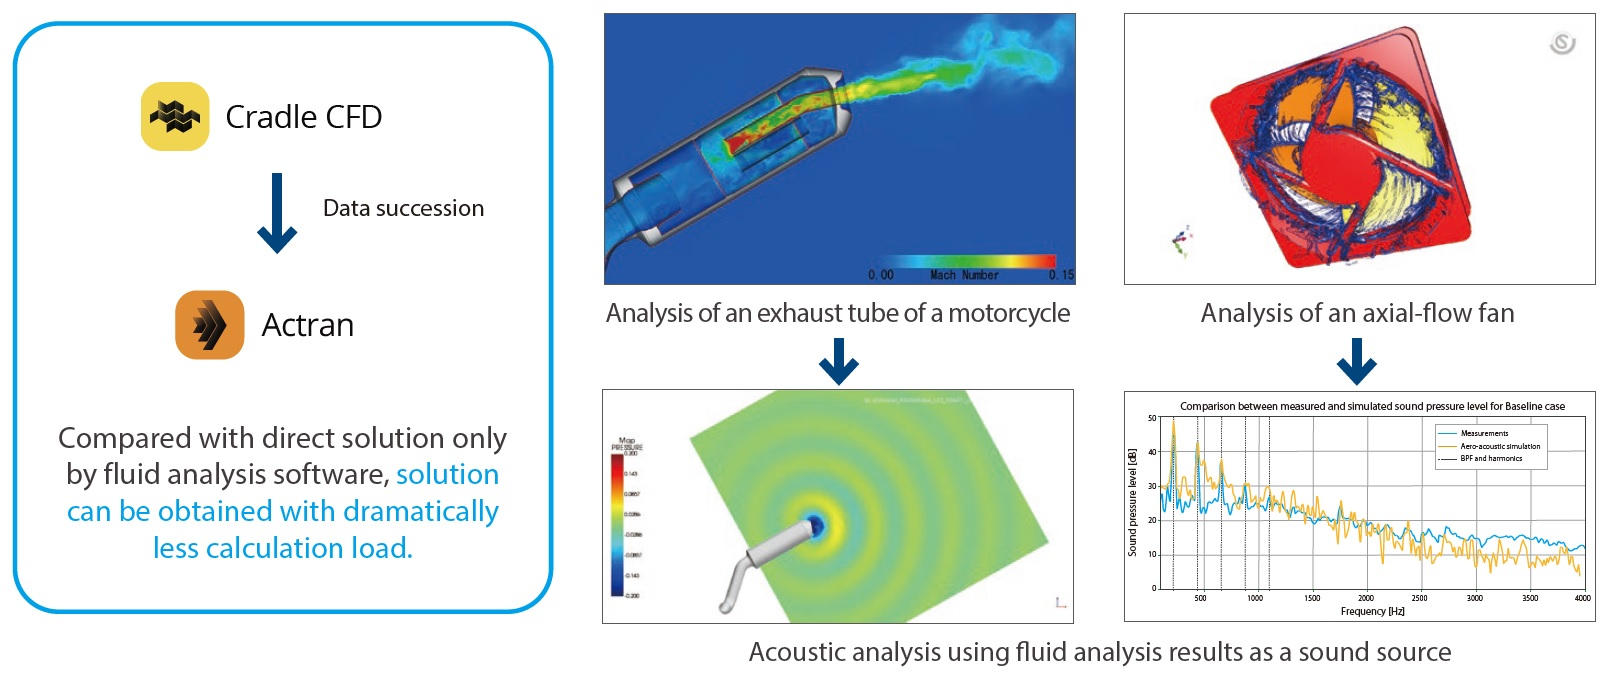 Co-simulation with Actran, acoustic analysis software